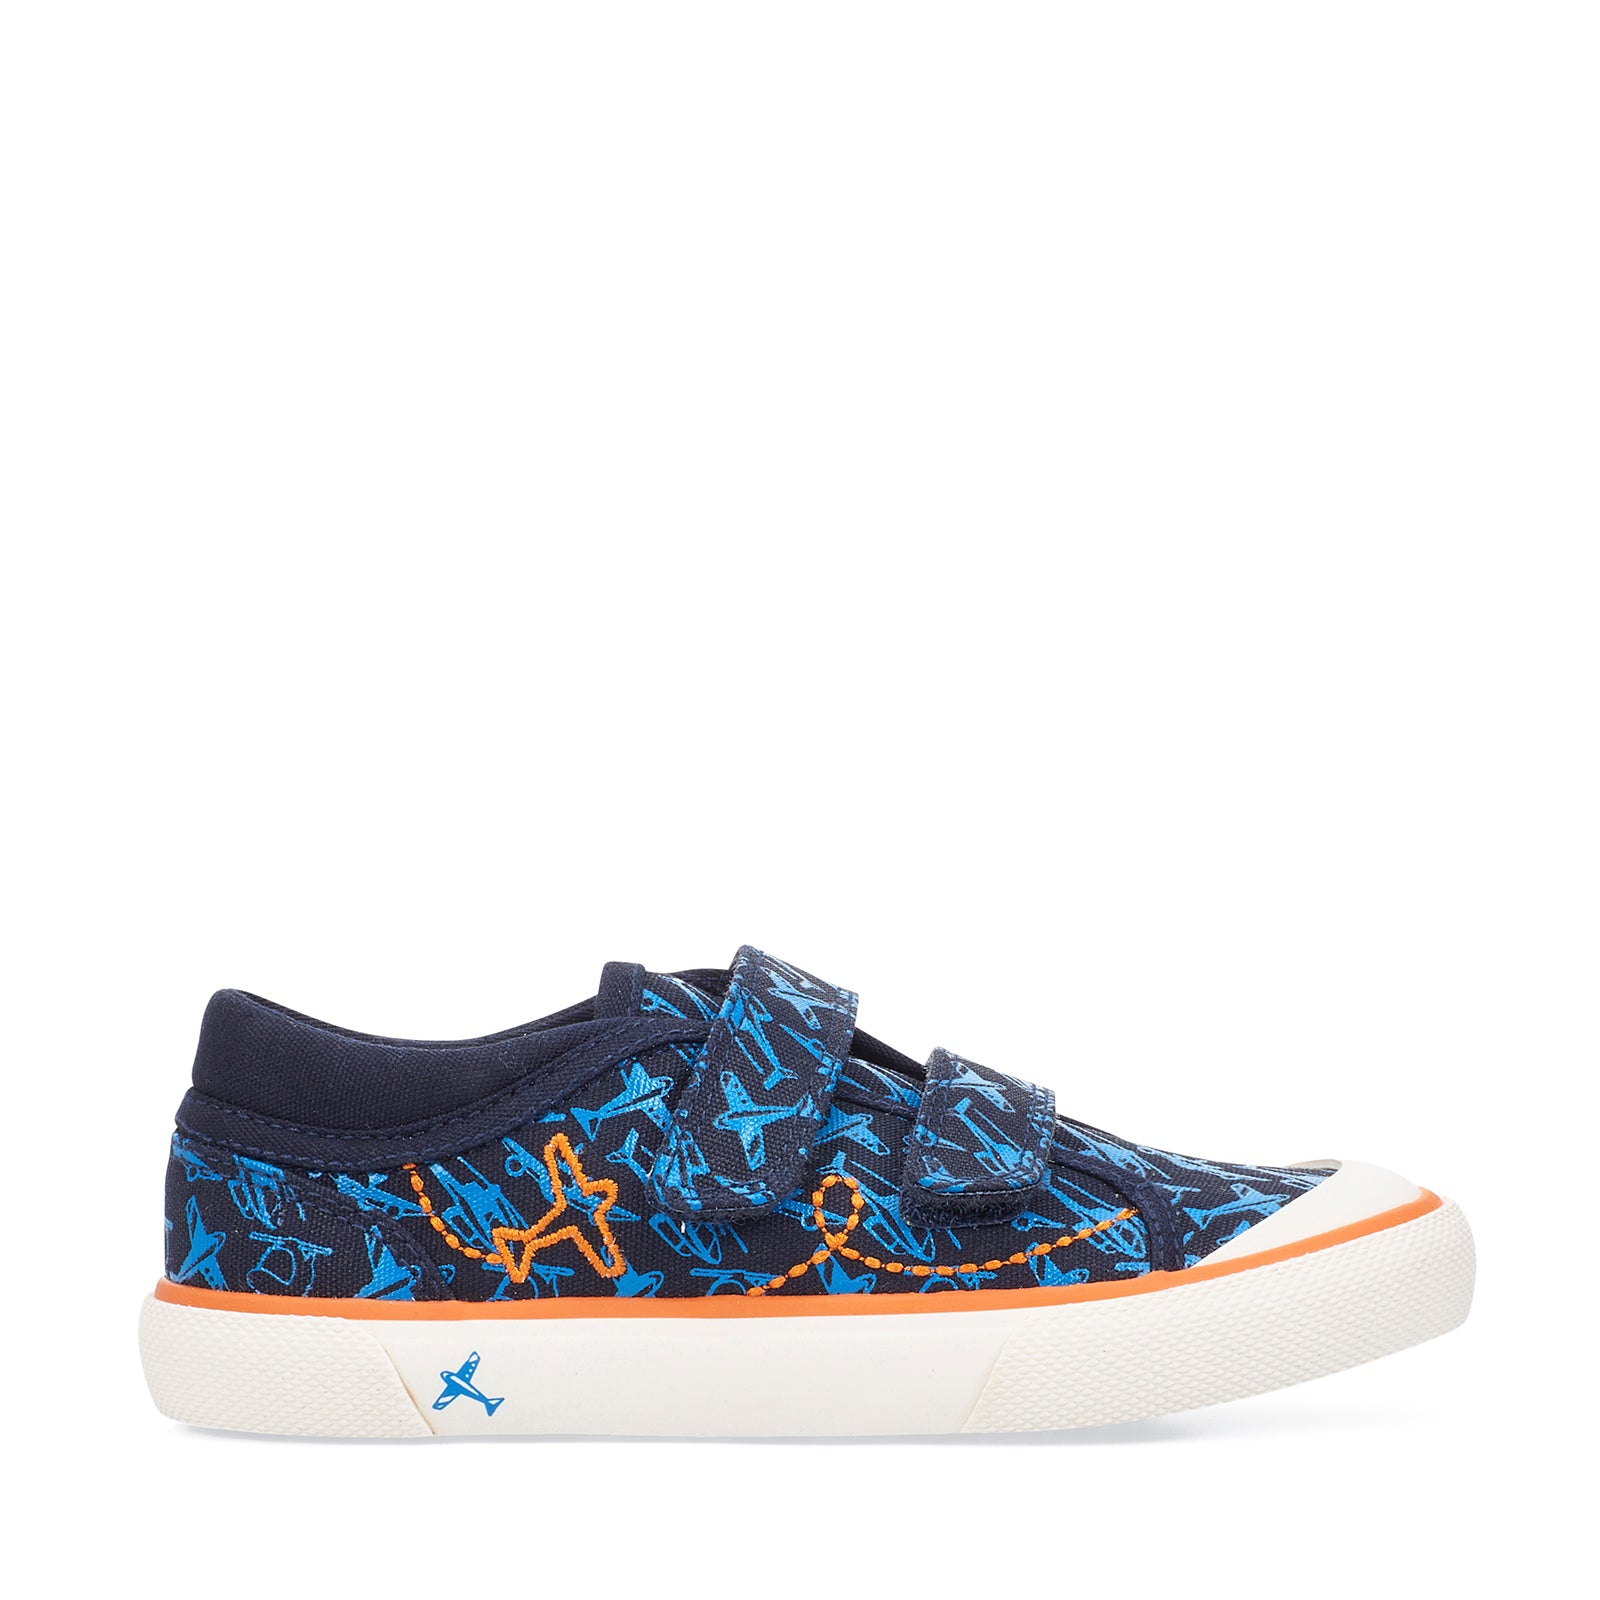 Start-Rite Zoom 6188 -   Boys Canvas in Navy with Aeroplane Print | Start-Rite Shoes | Personal Shoe Fitting Service | Wisemans | Bantry | West Cork | Munster | Ireland